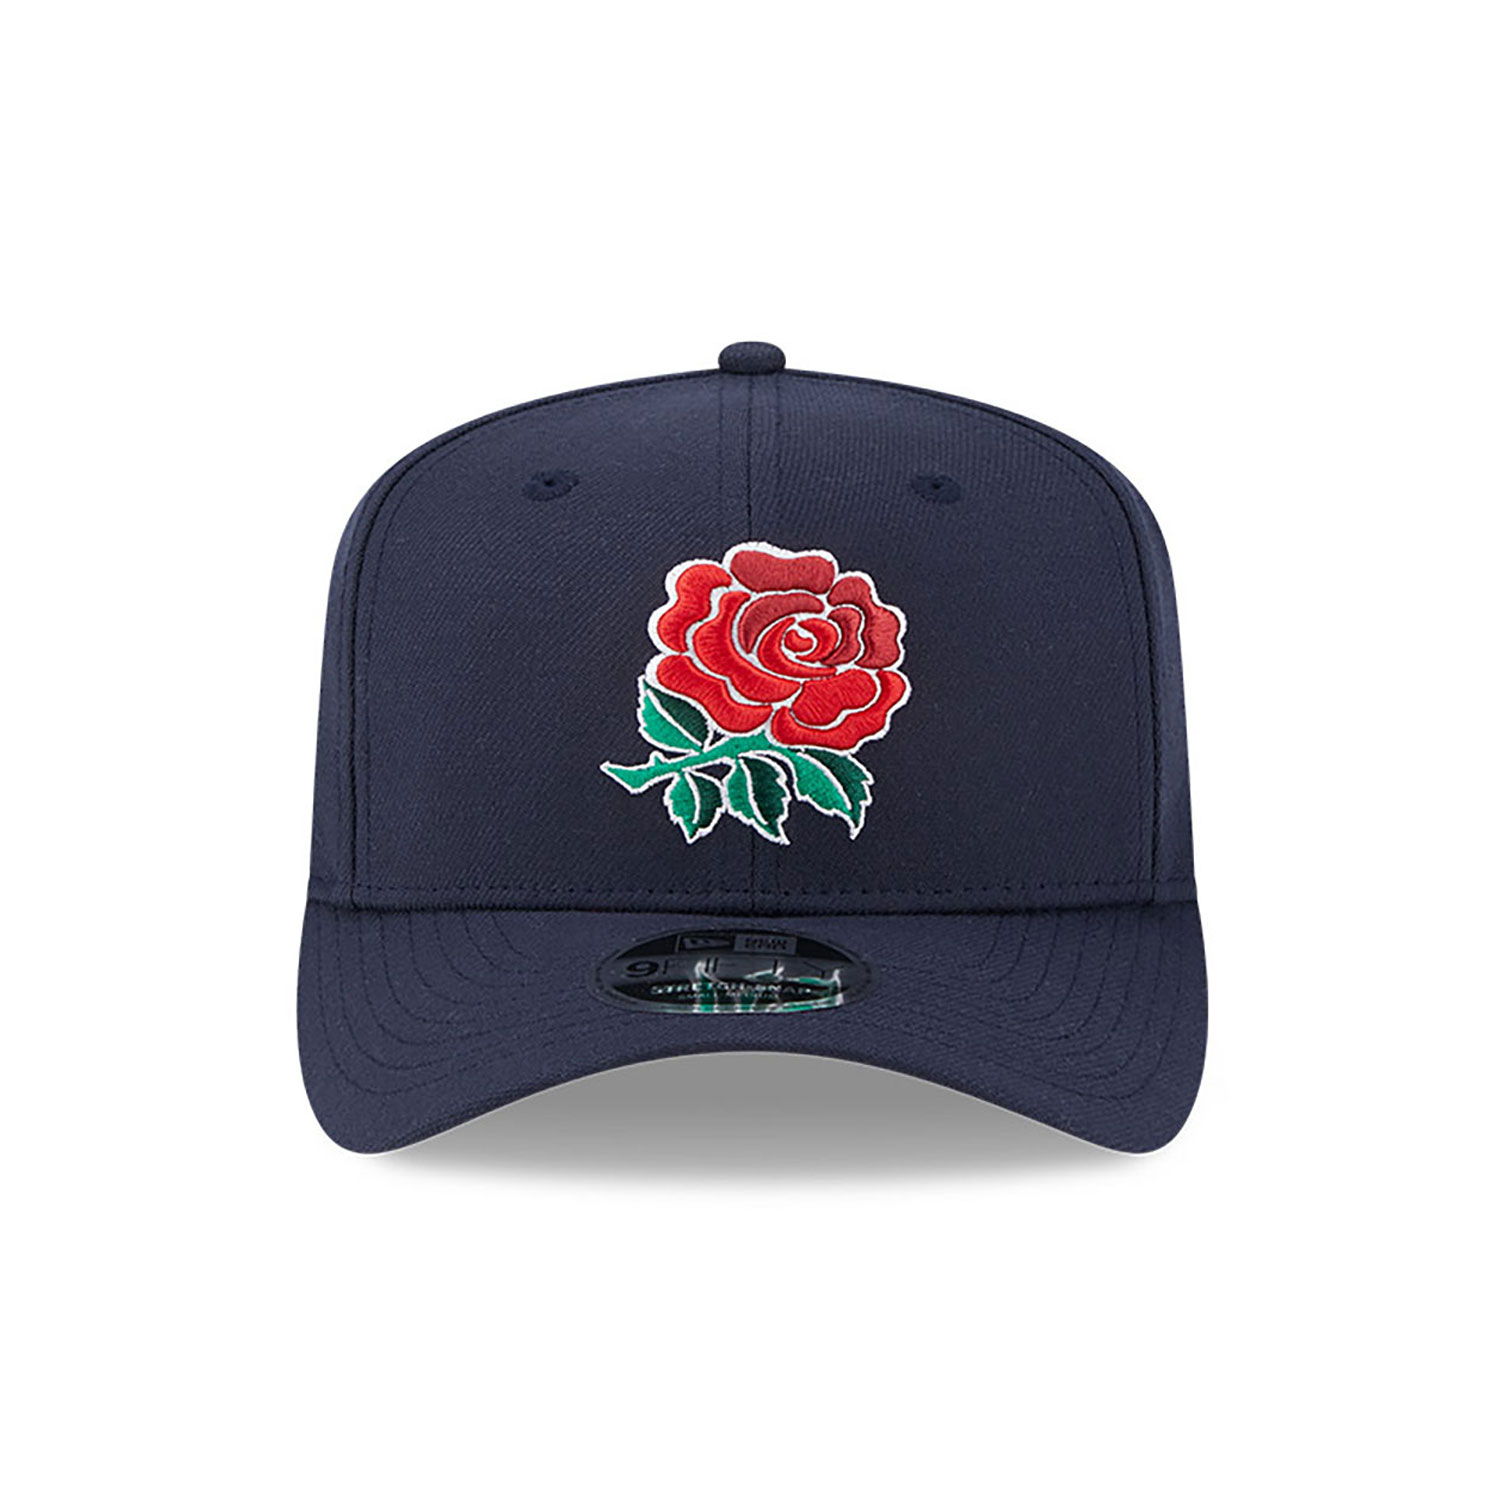 Inghilterra Rugby Union Rose Navy Stretch Snap 9FIFTY Cap